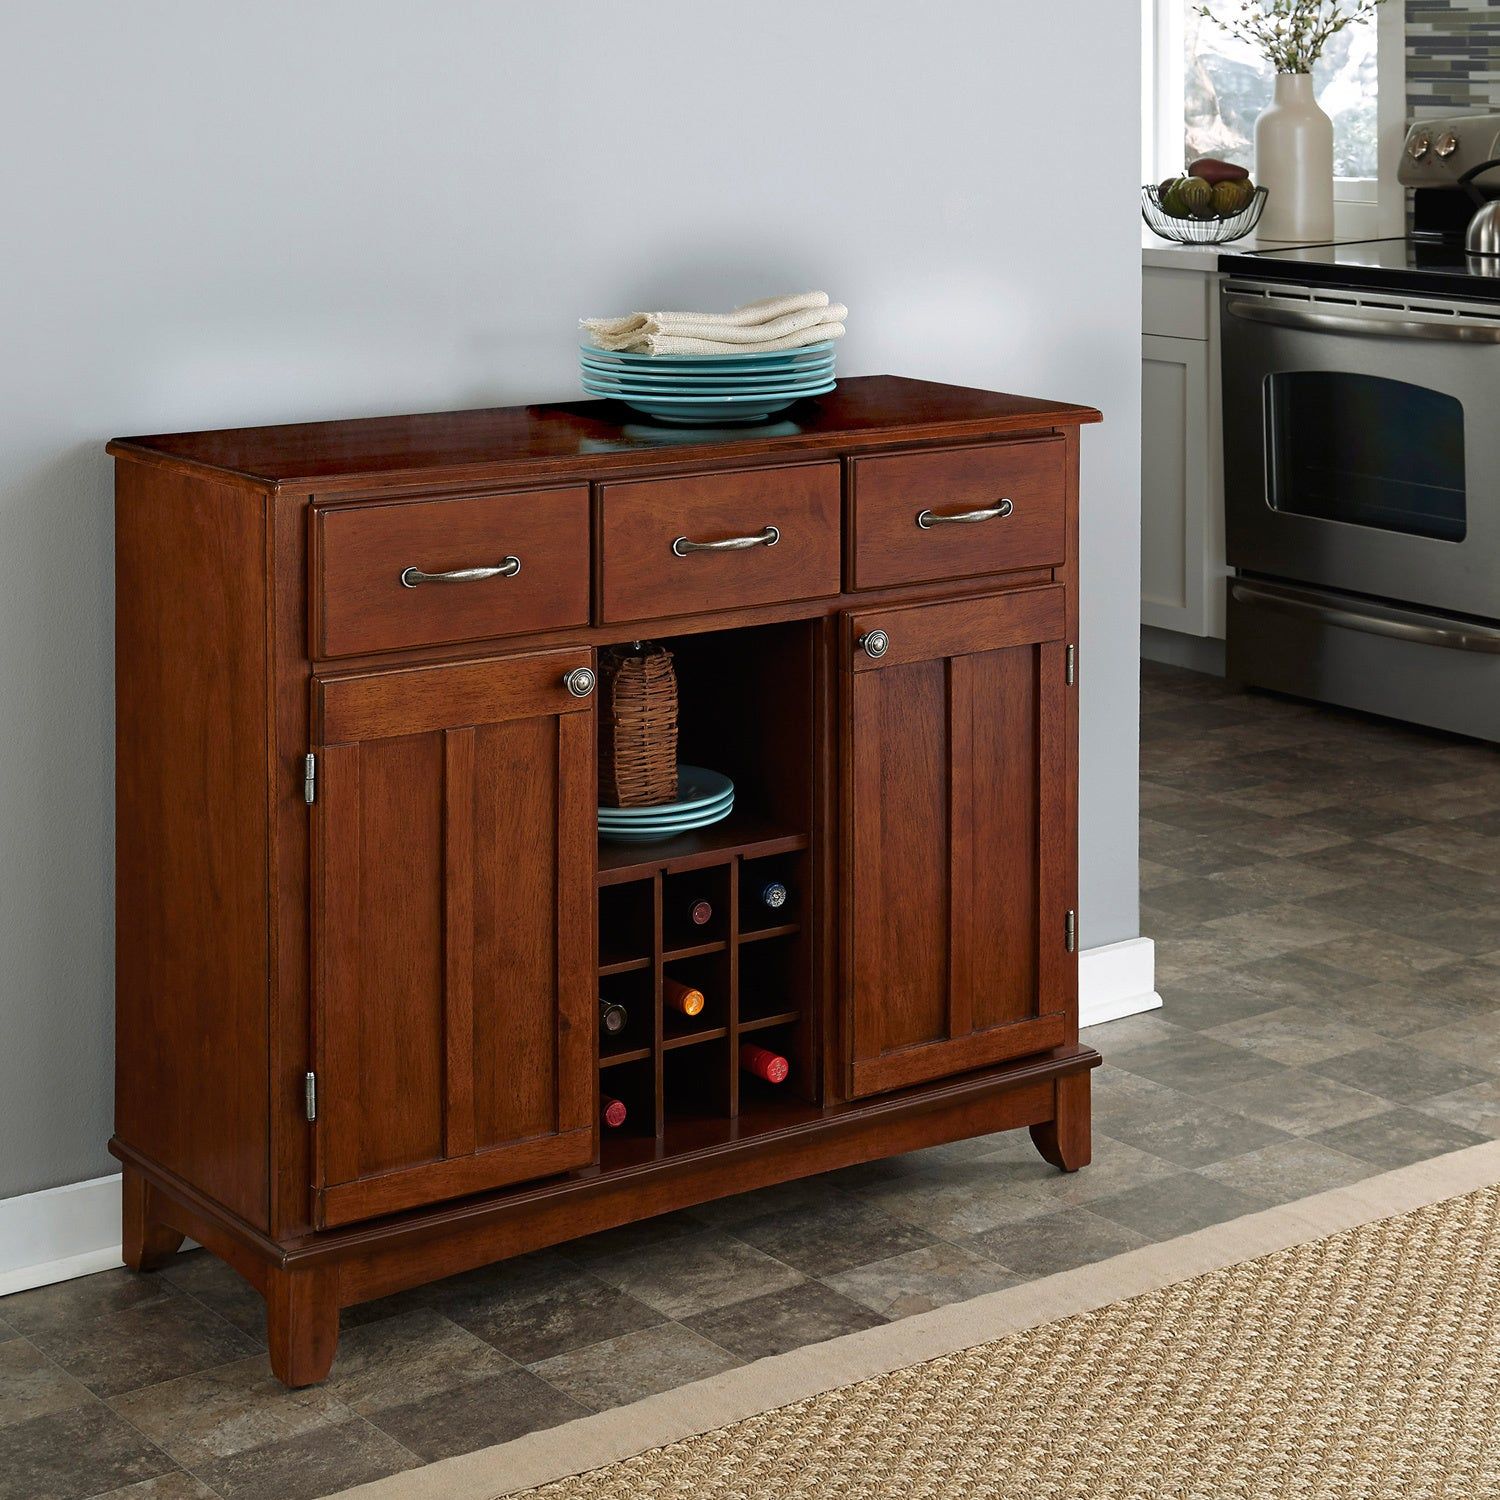 Shop Gracewood Hollow Arthur Medium Cherry Buffet With Wood Throughout Medium Buffets With Wood Top (View 1 of 30)